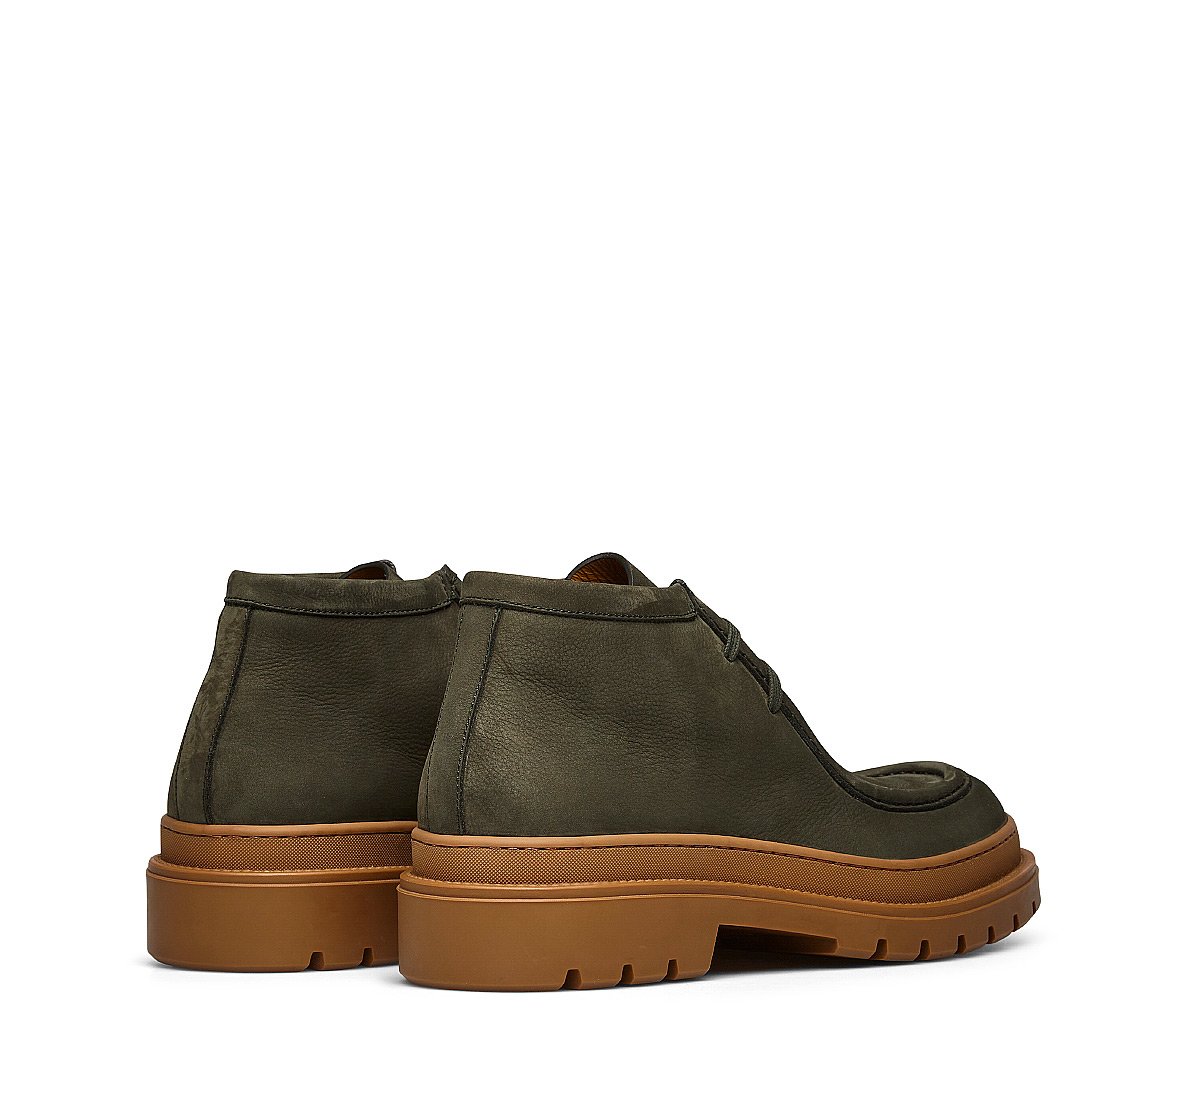 Nubuck ankle boots